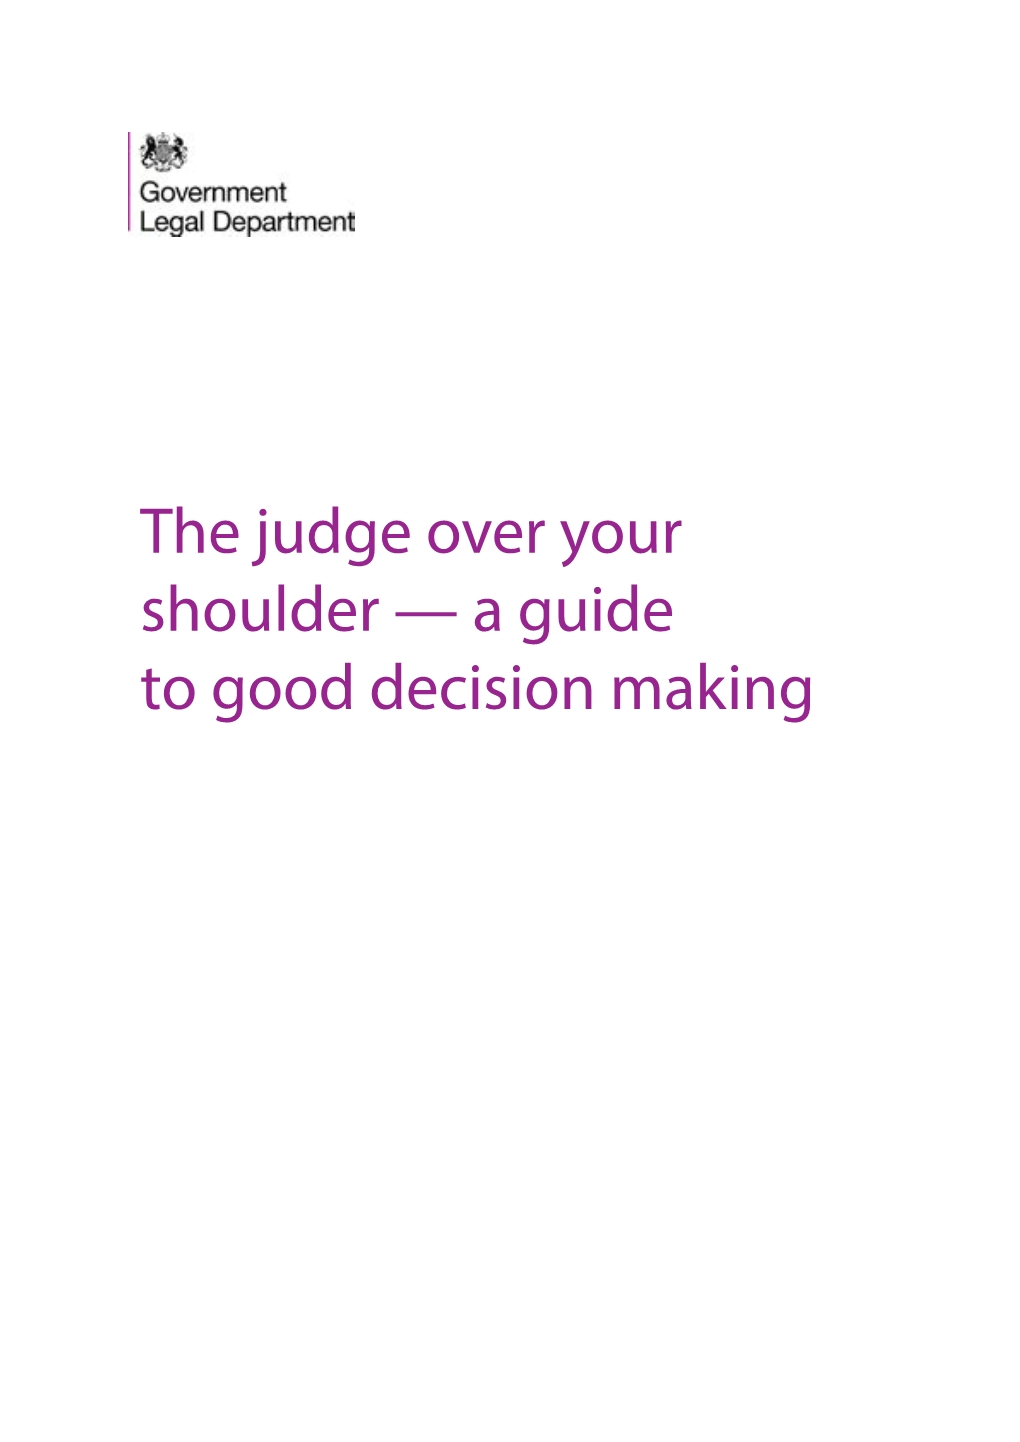 The Judge Over Your Shoulder — a Guide to Good Decision Making